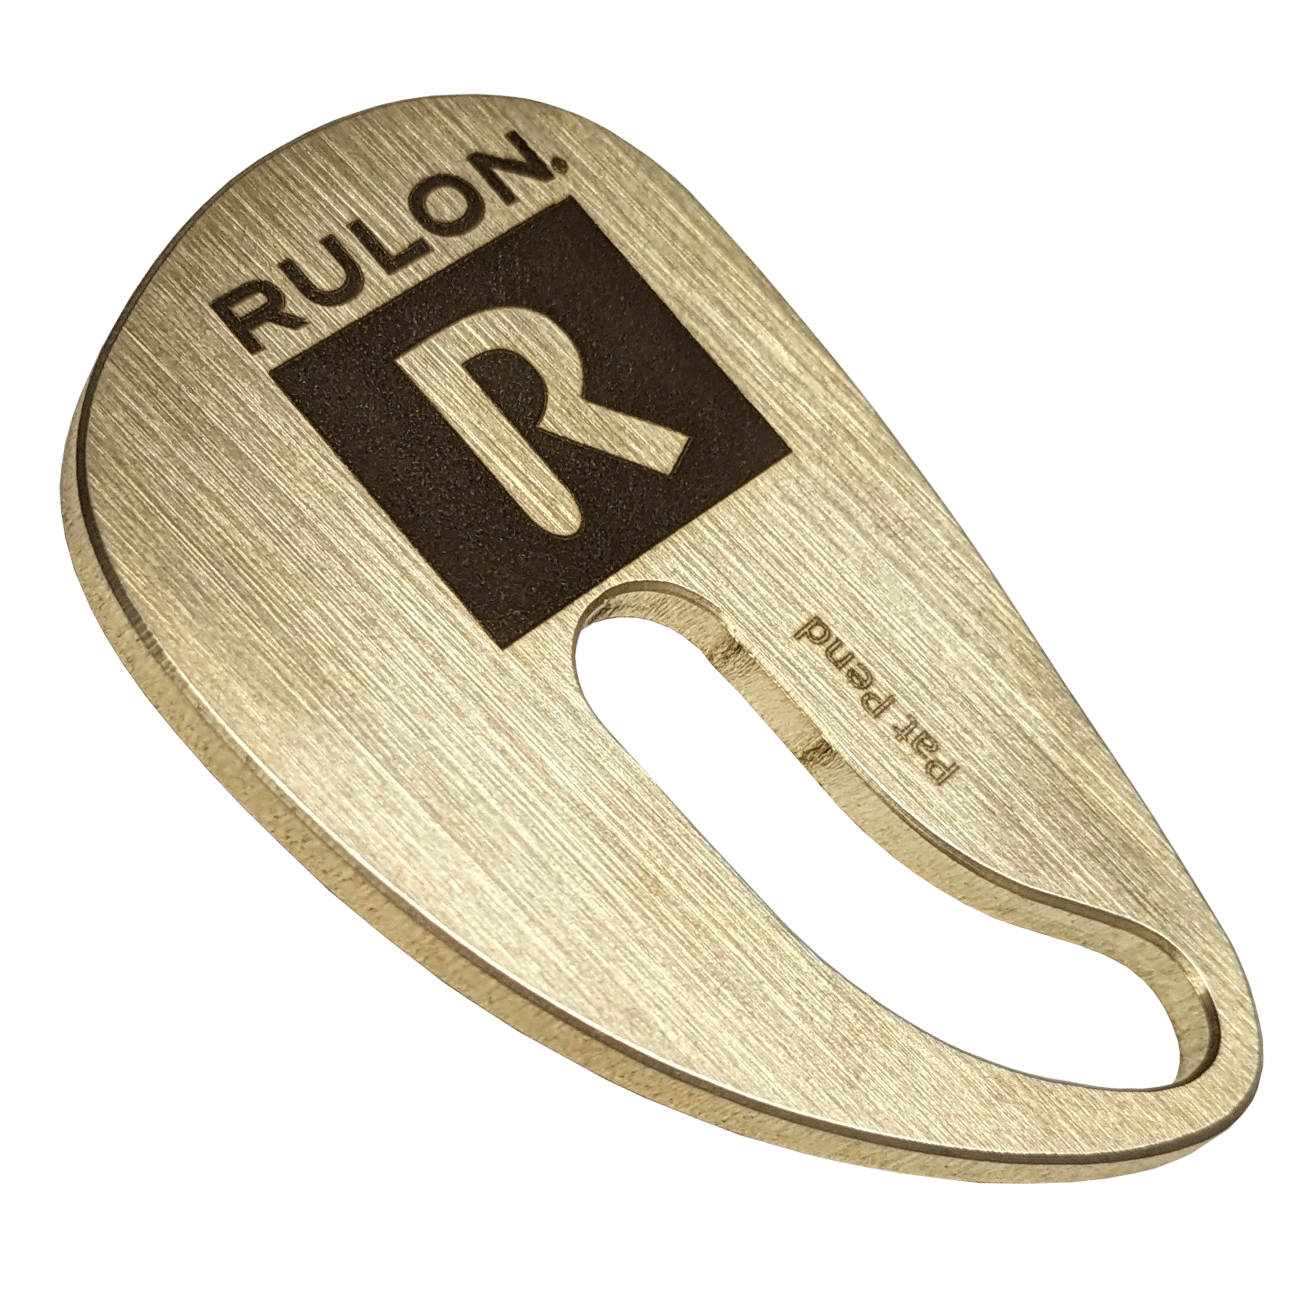 Raw brass saxophone rest designed by RULON BROWN. It replaces the right thumb hook of the saxophone and is adjustable to fit any hand size comfortably.